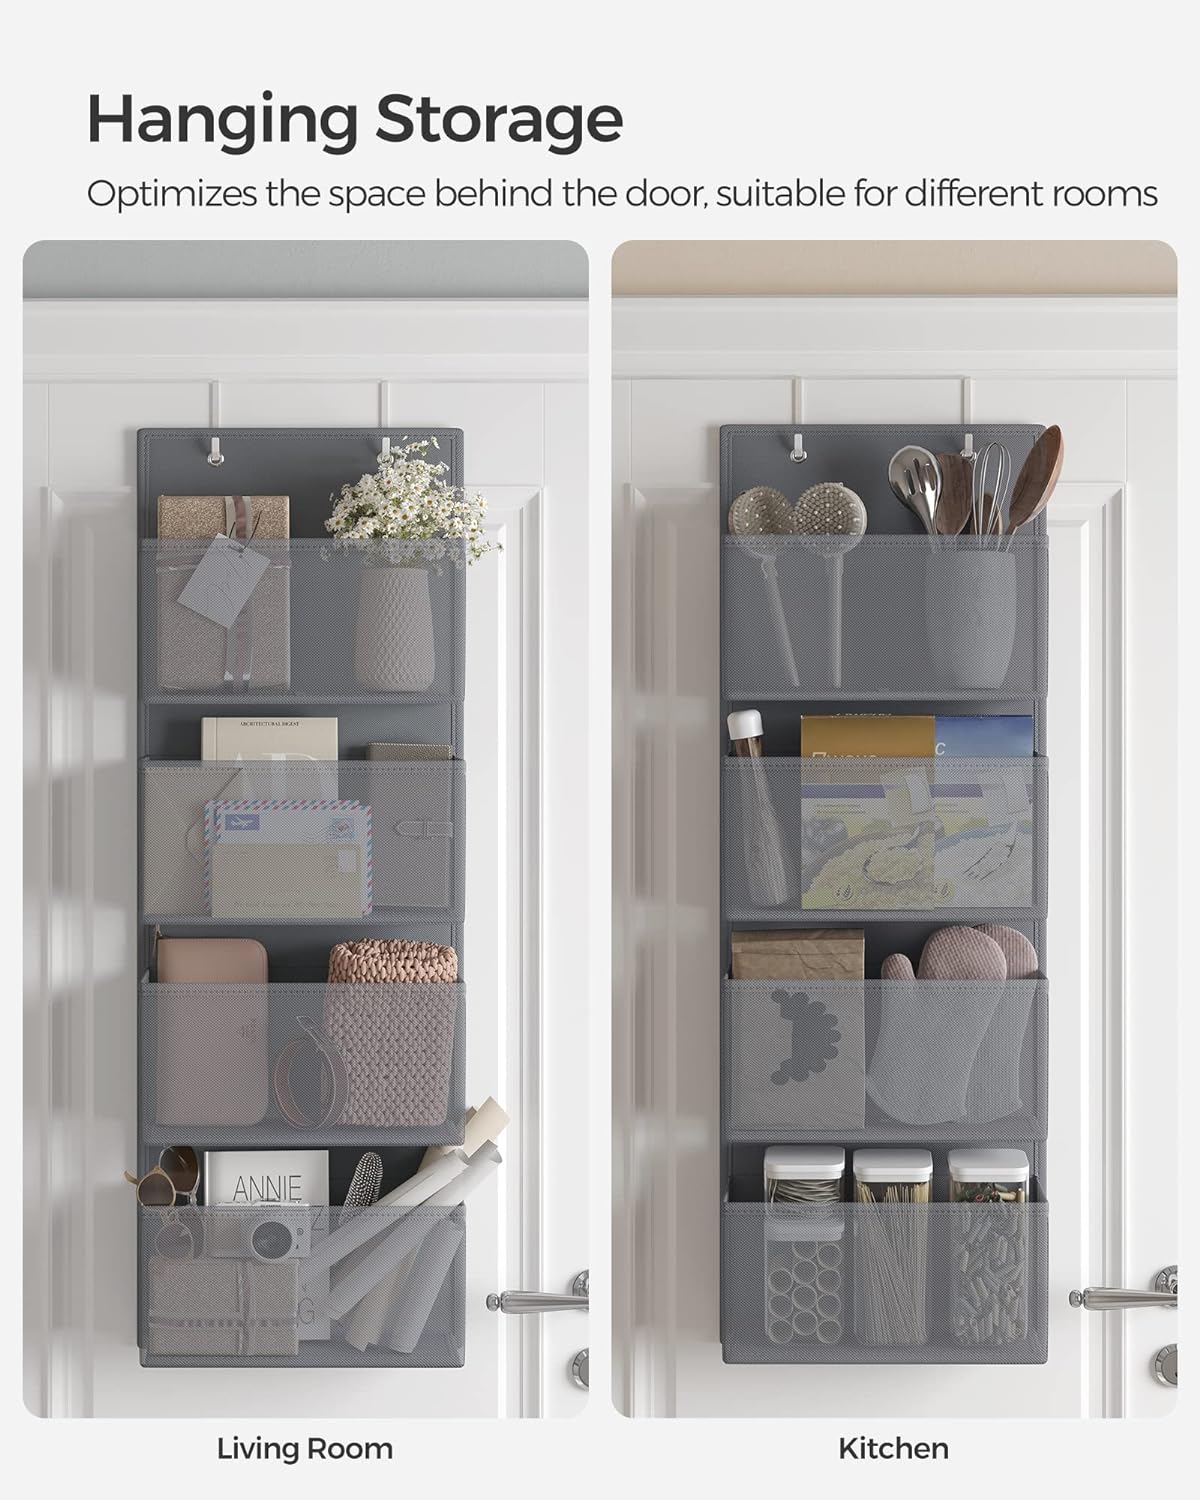 SONGMICS Hanging Closet Organizers and Storage with 4 Compartments Gray